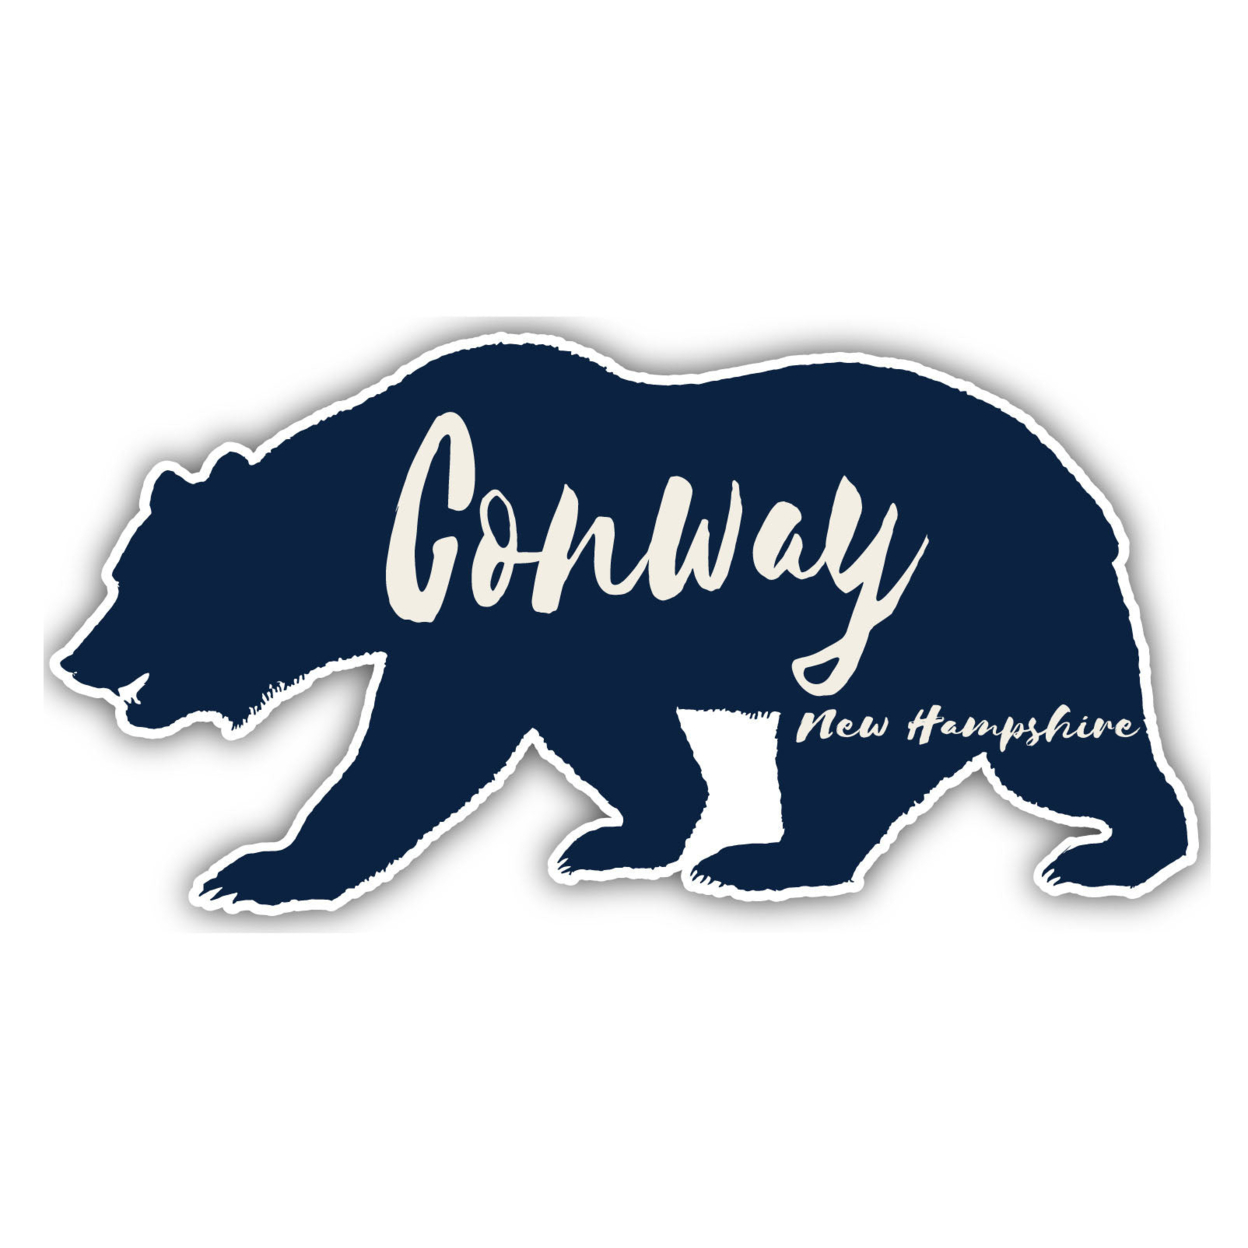 Conway New Hampshire Souvenir Decorative Stickers (Choose Theme And Size) - Single Unit, 12-Inch, Bear